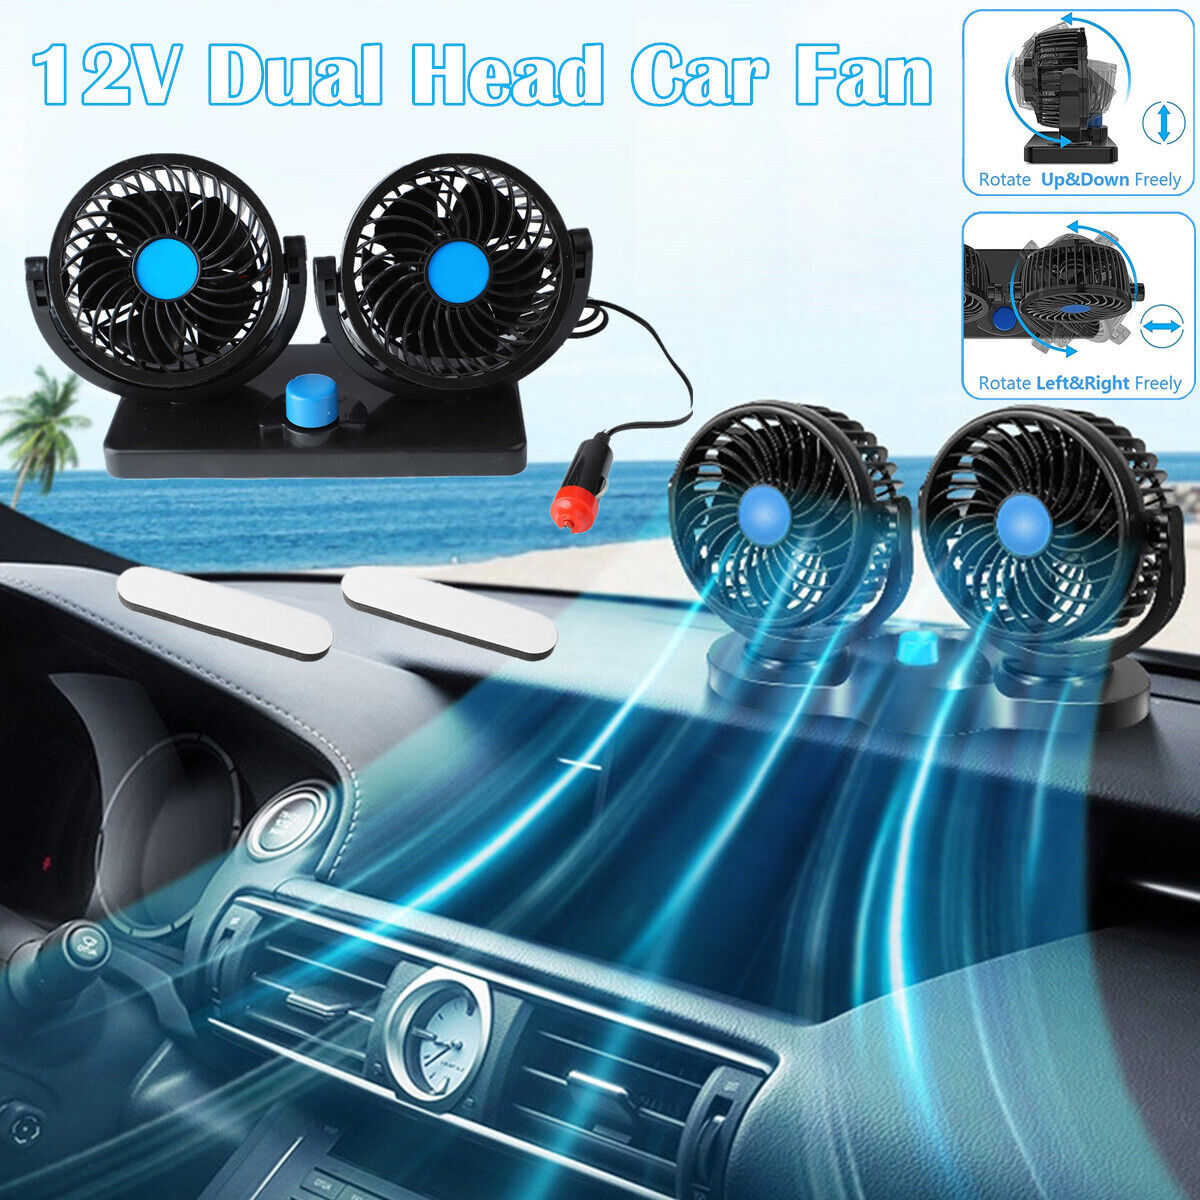 12V Dual Head Car Fan Portable Vehicle Truck 360° Rotatable Auto Cooling Cooler